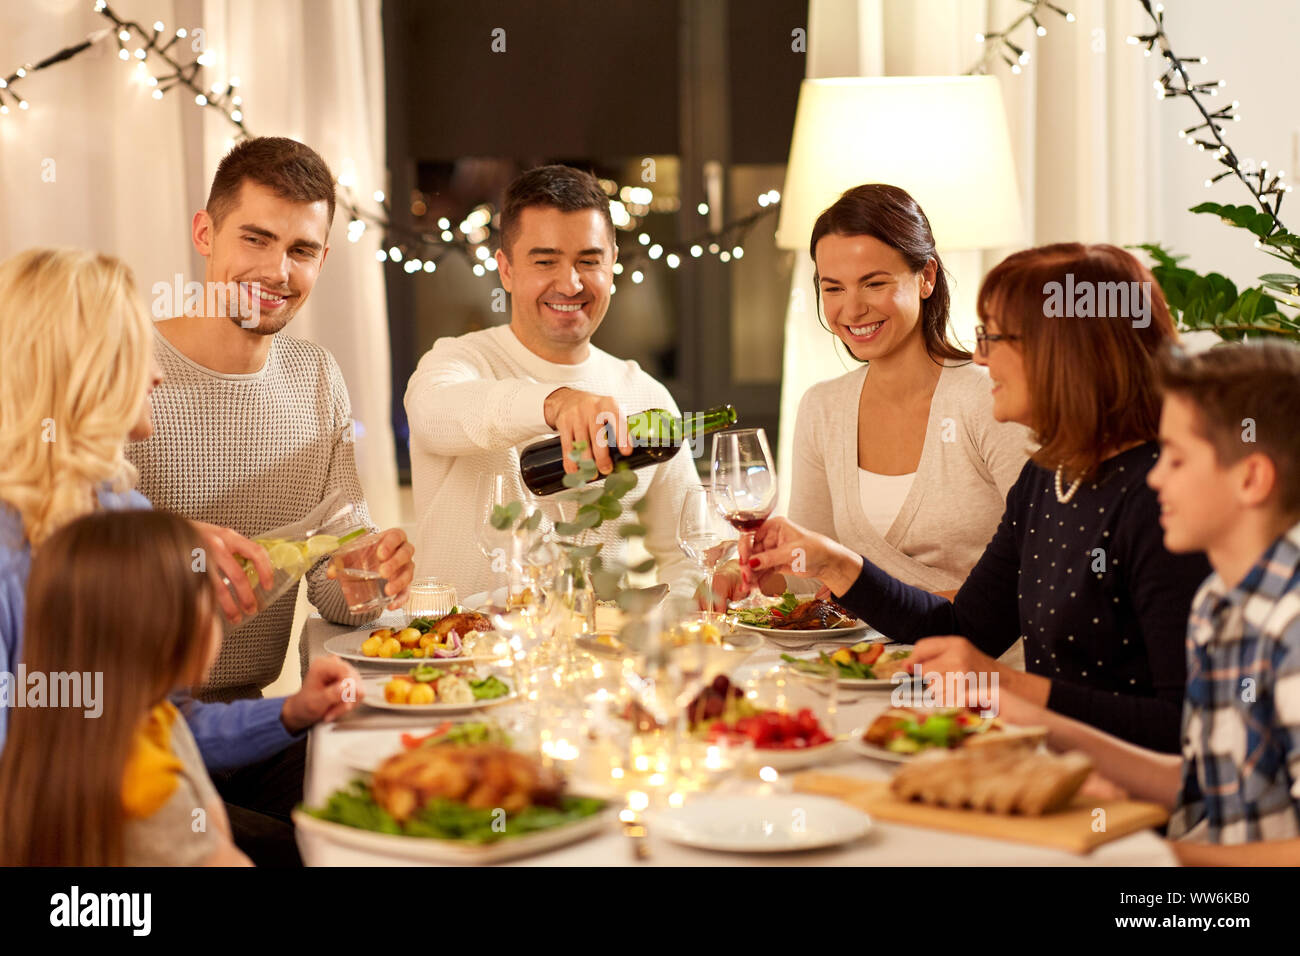 happy family having dinner party at home Stock Photo